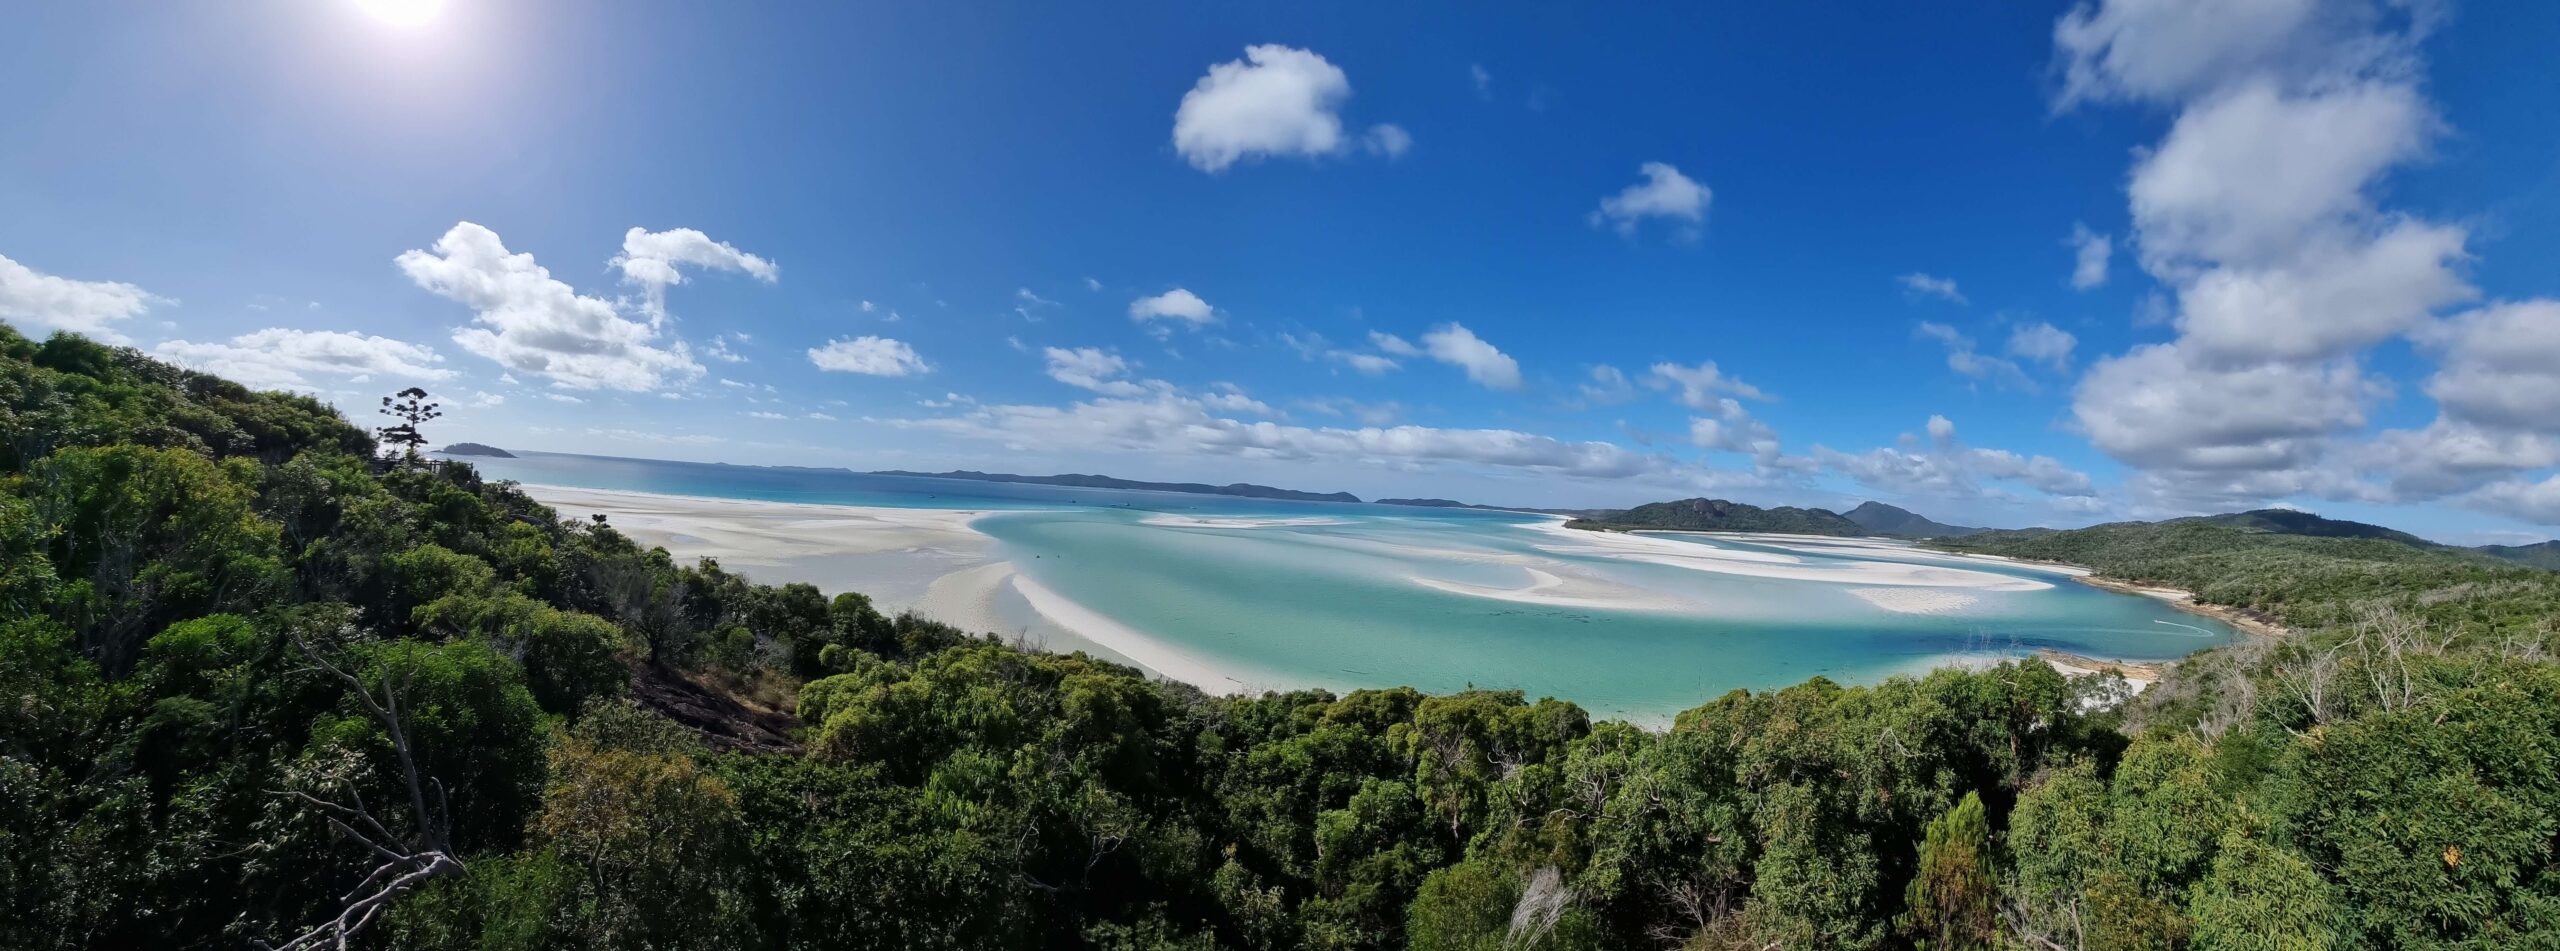 Whitehaven Beach, the Whitsundays, from Hill Inlet Lookout. Photo taken by Jacques.